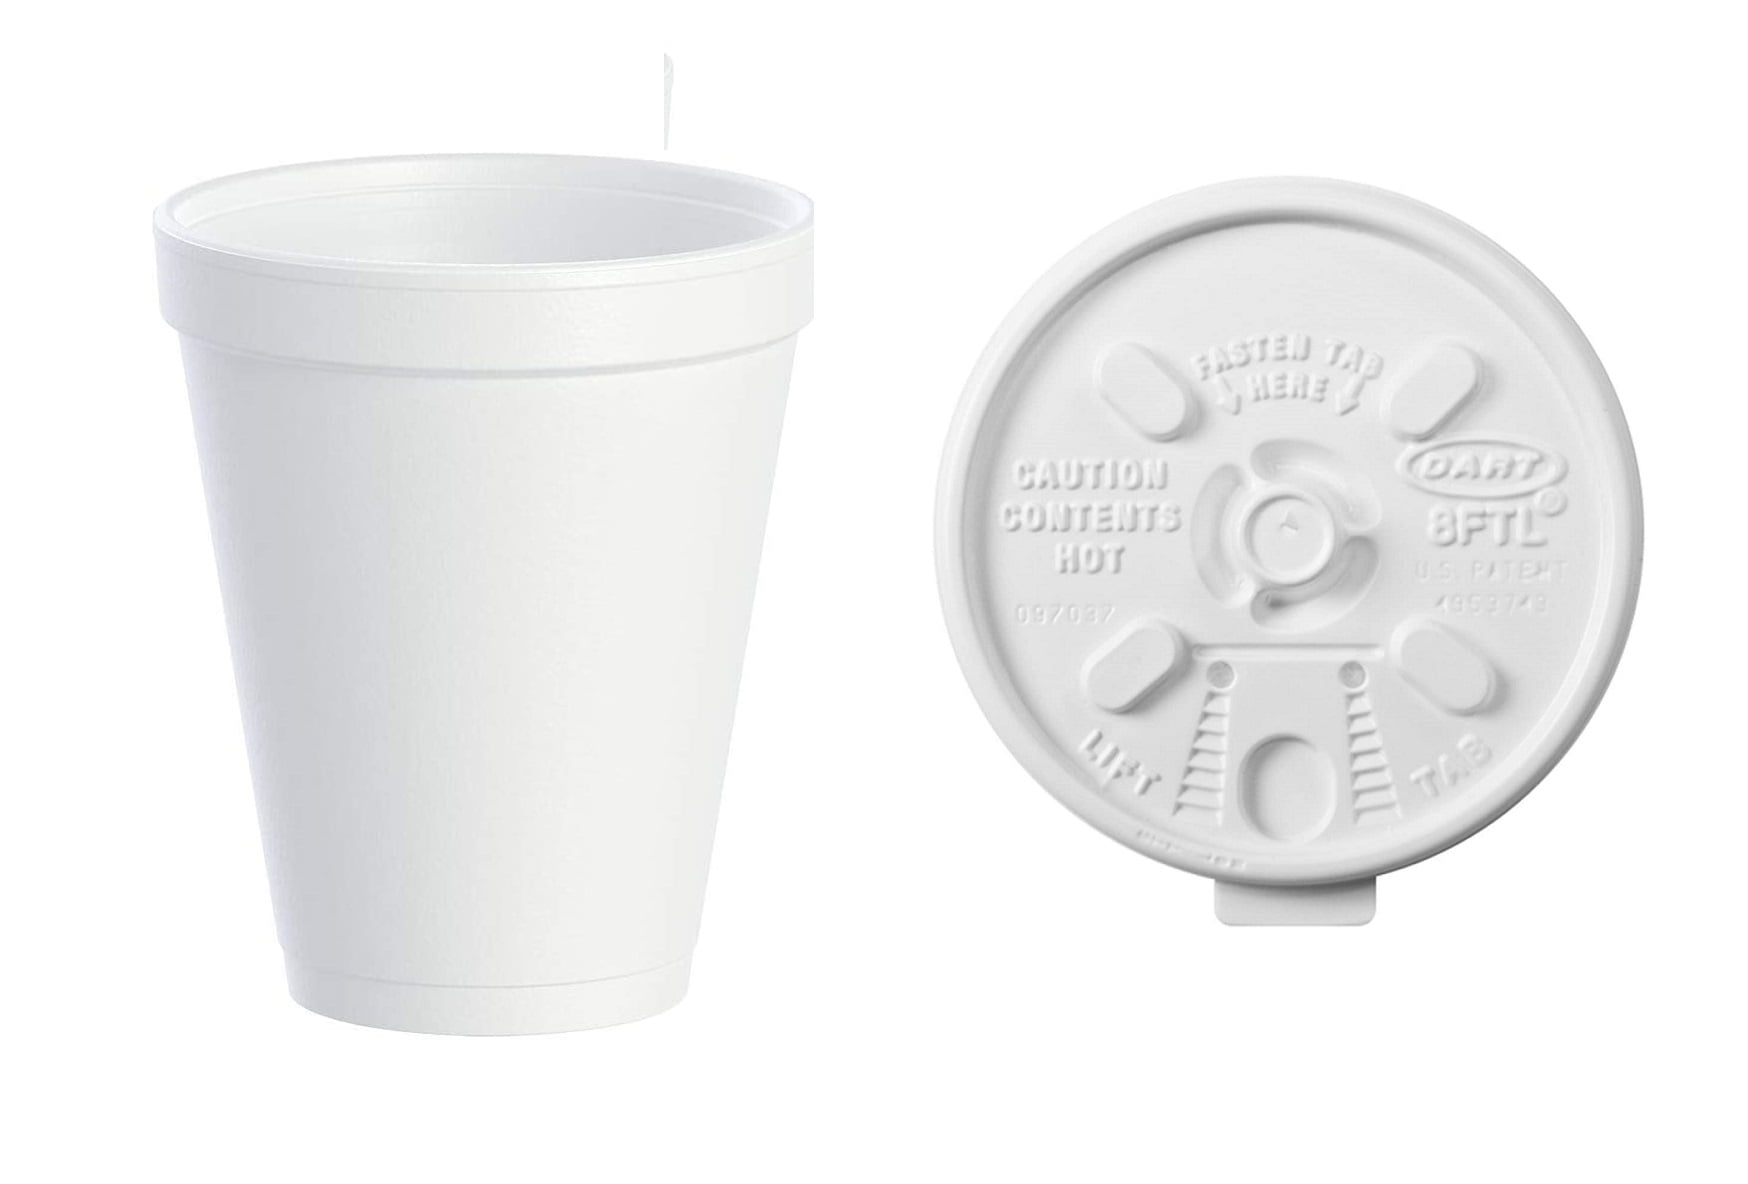 GALLEGOPLAST expands its foam range again with the 8 oz cup